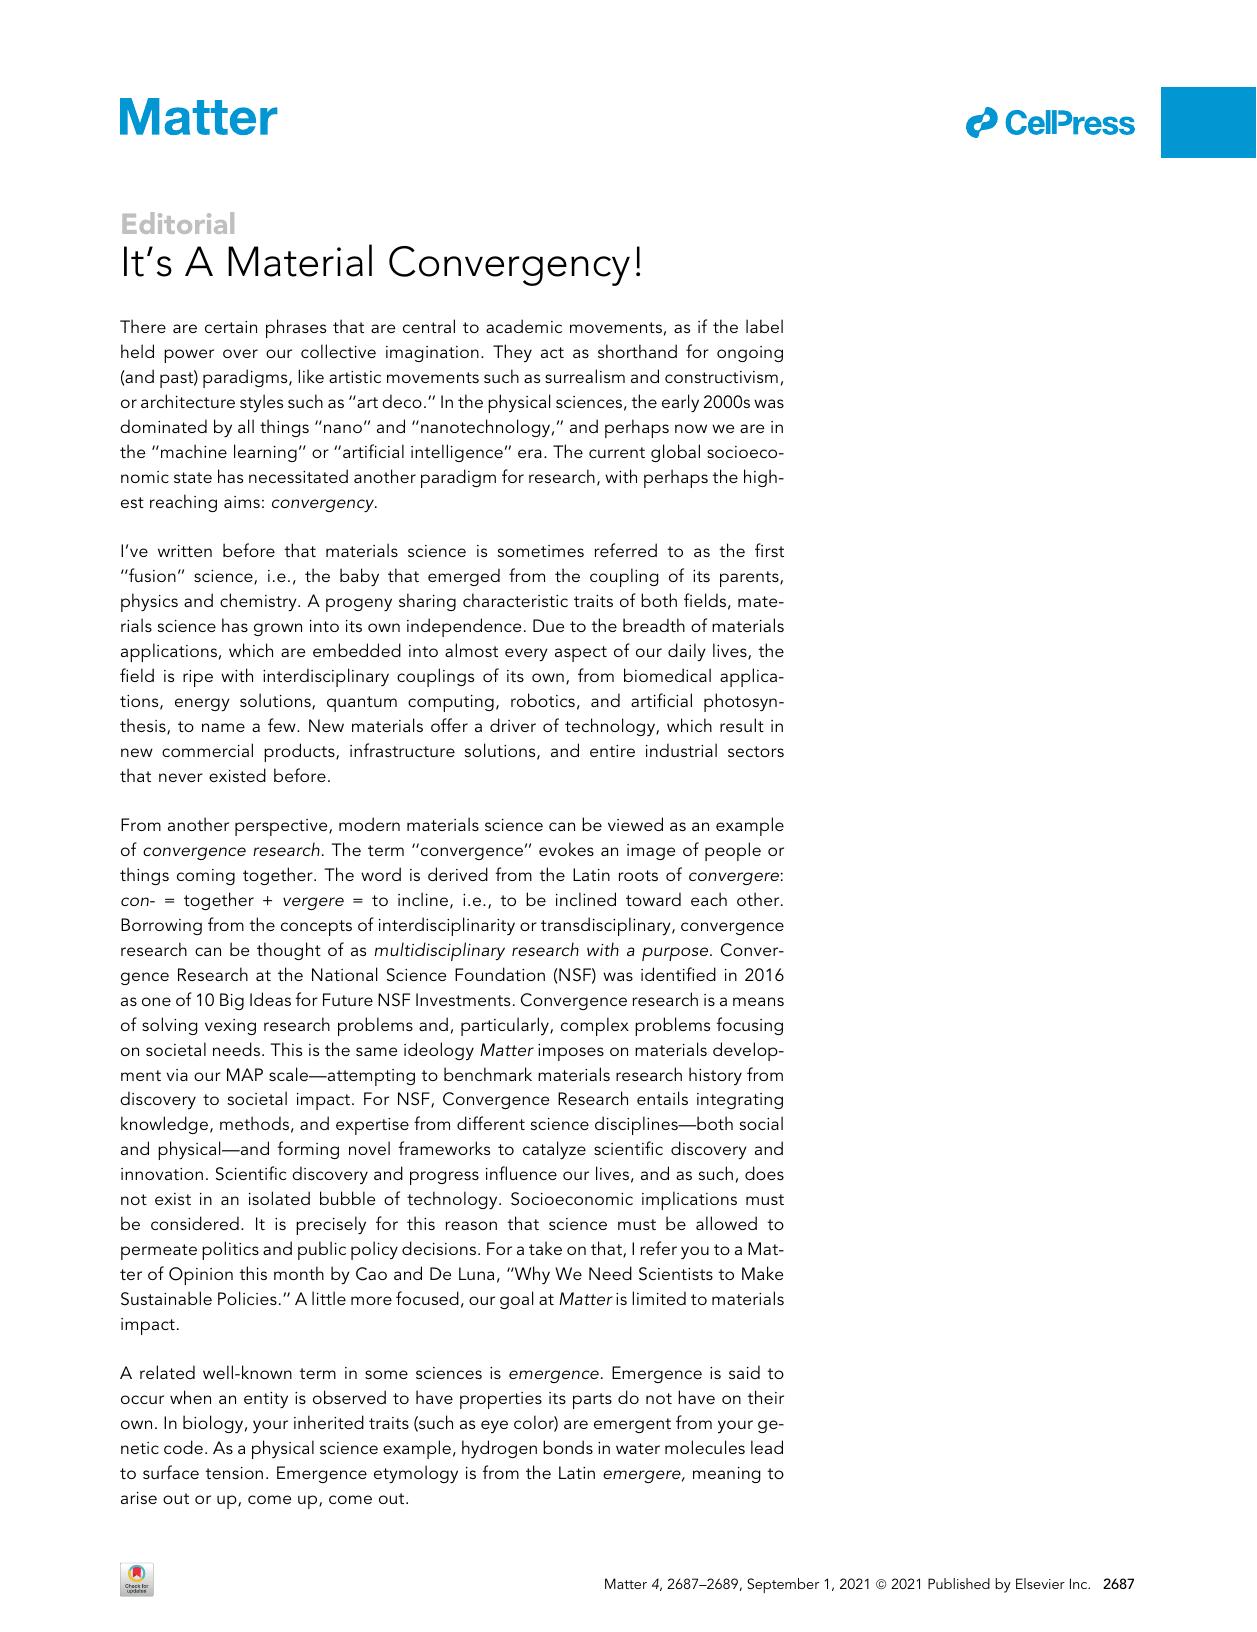 It's A Material Convergency! by Steve Cranford